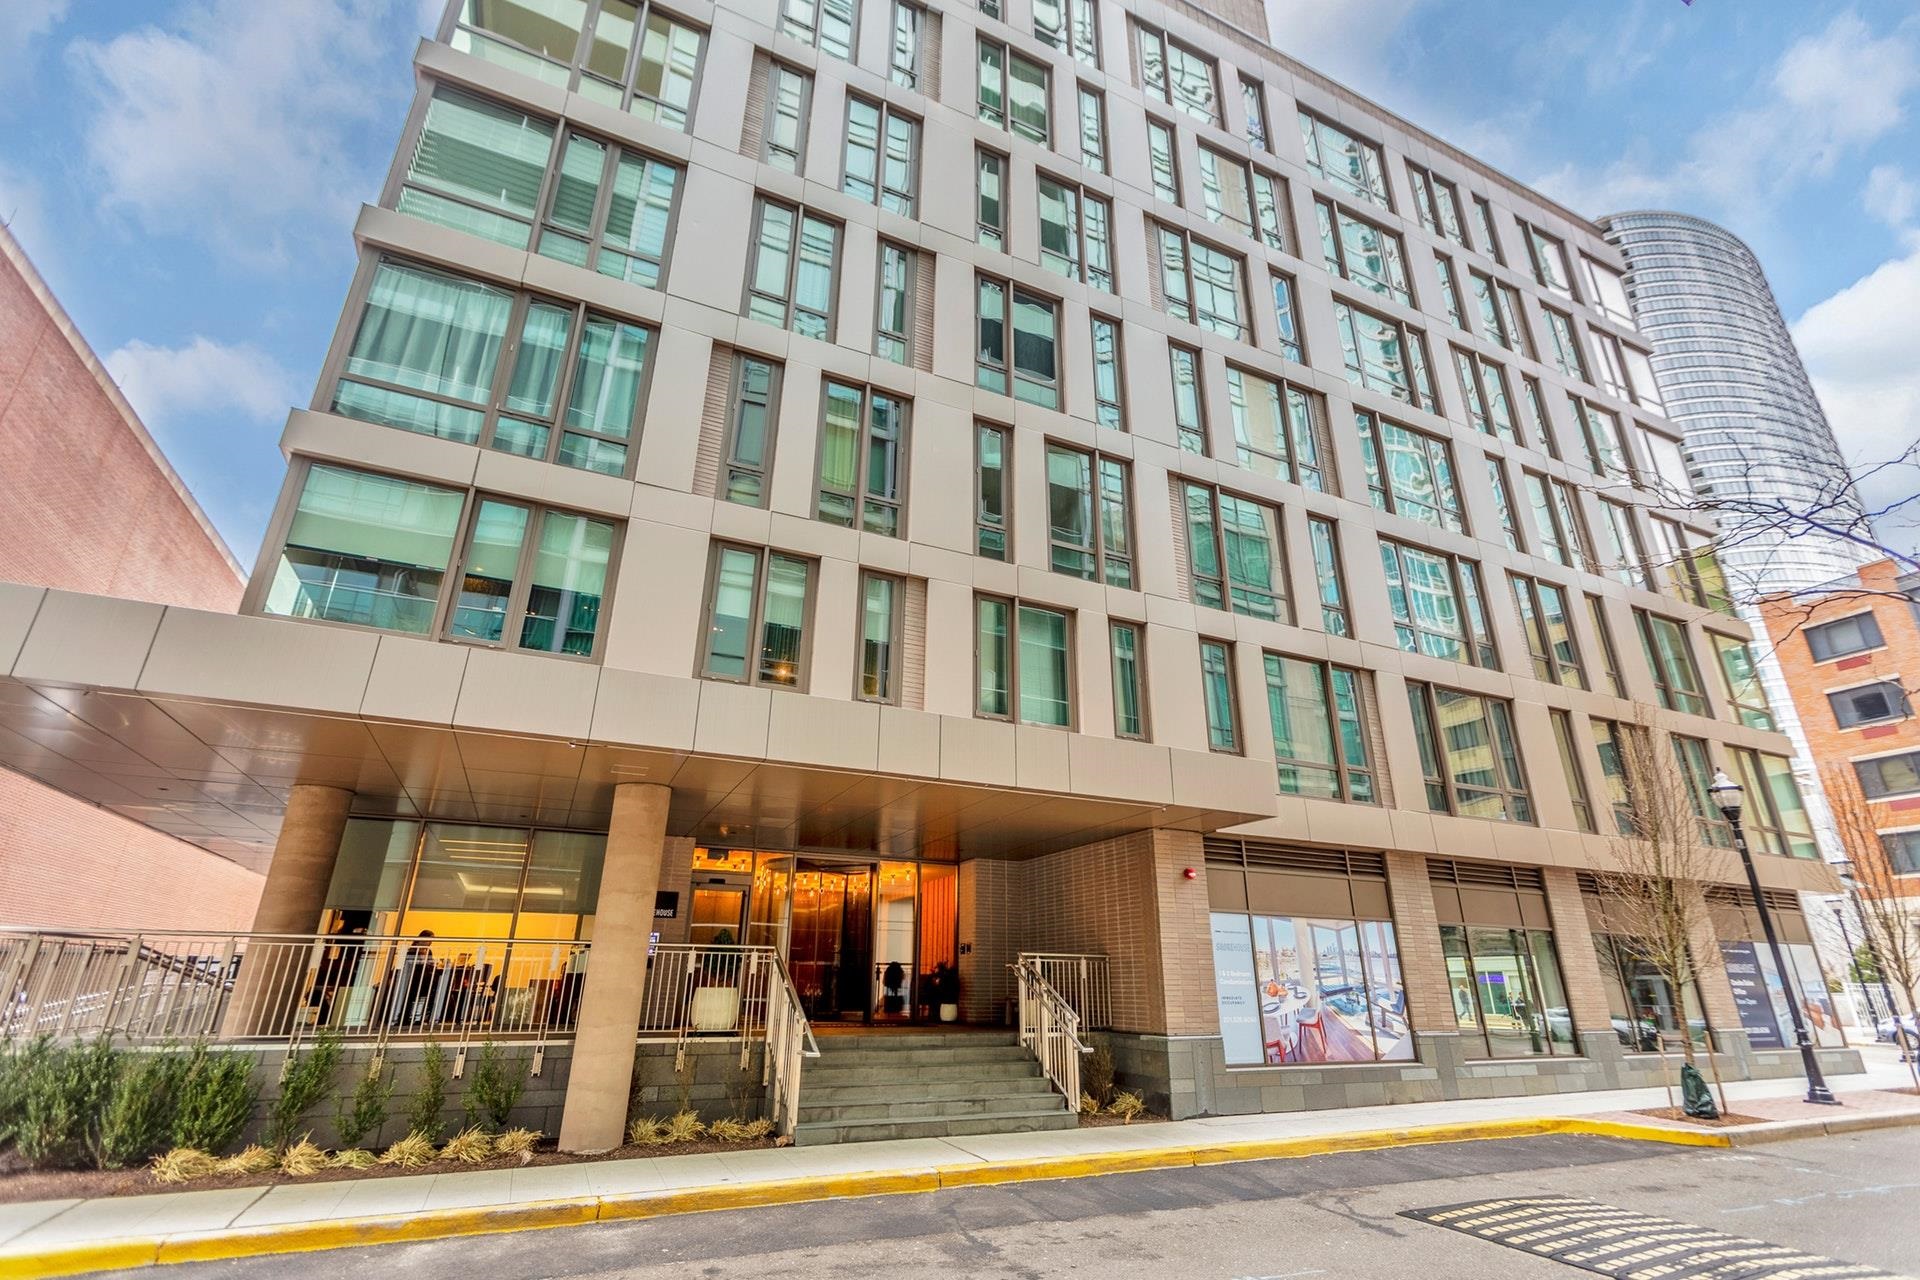 # 240006103 - For Rent in JERSEY CITY - Downtown NJ